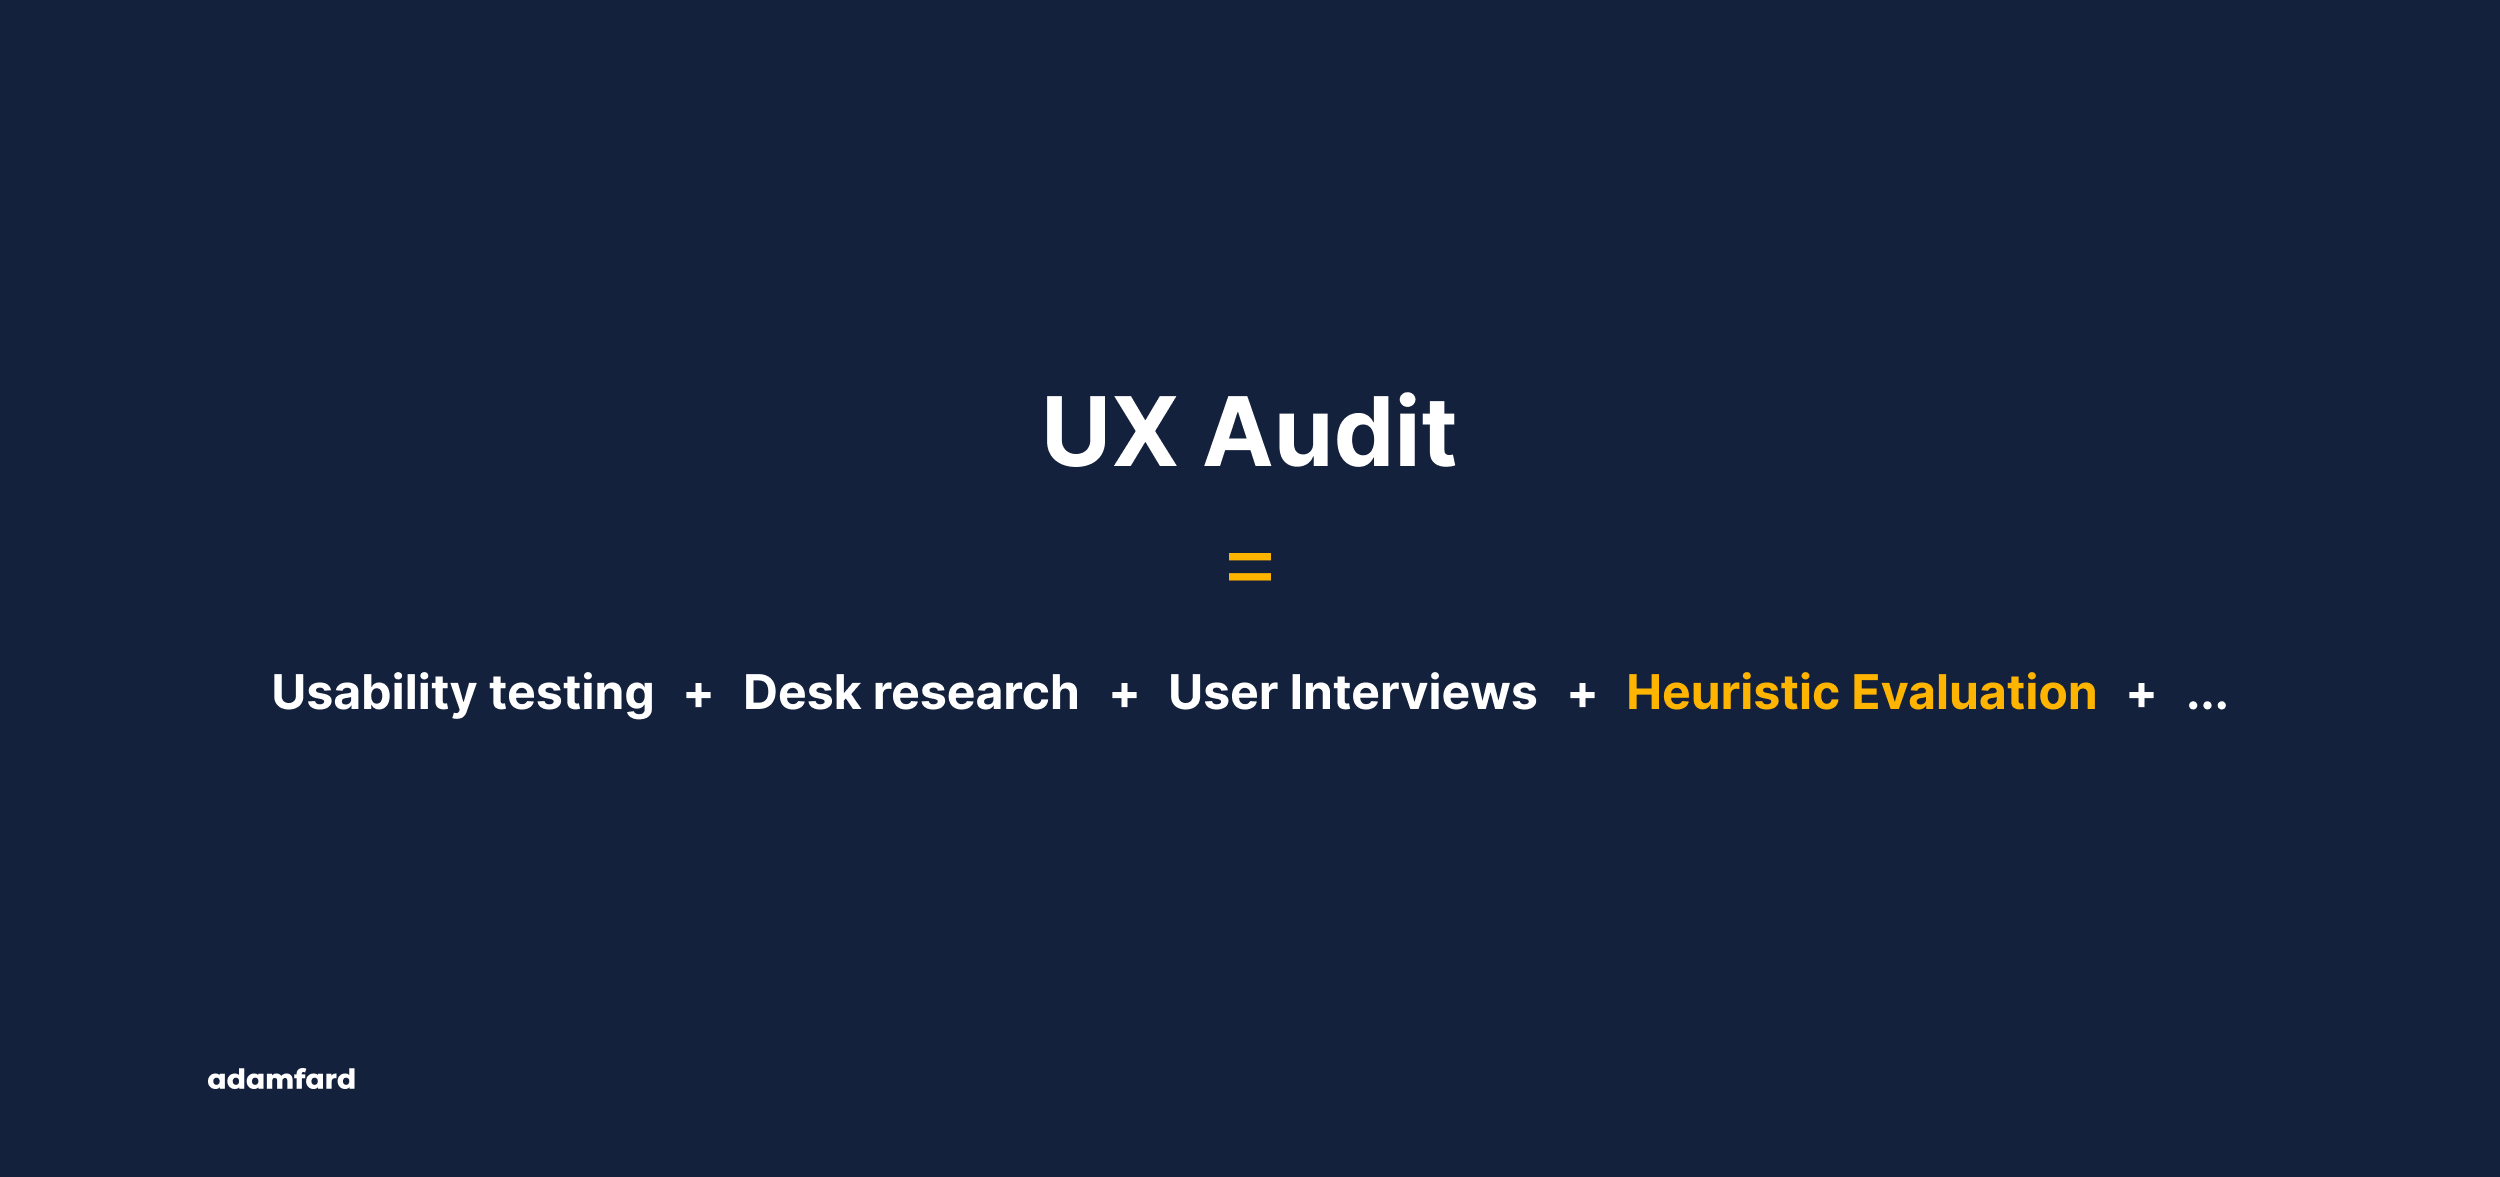 A UX Audit can integrate findings from usability testing, desk research, quantitative analysis, and user interviews